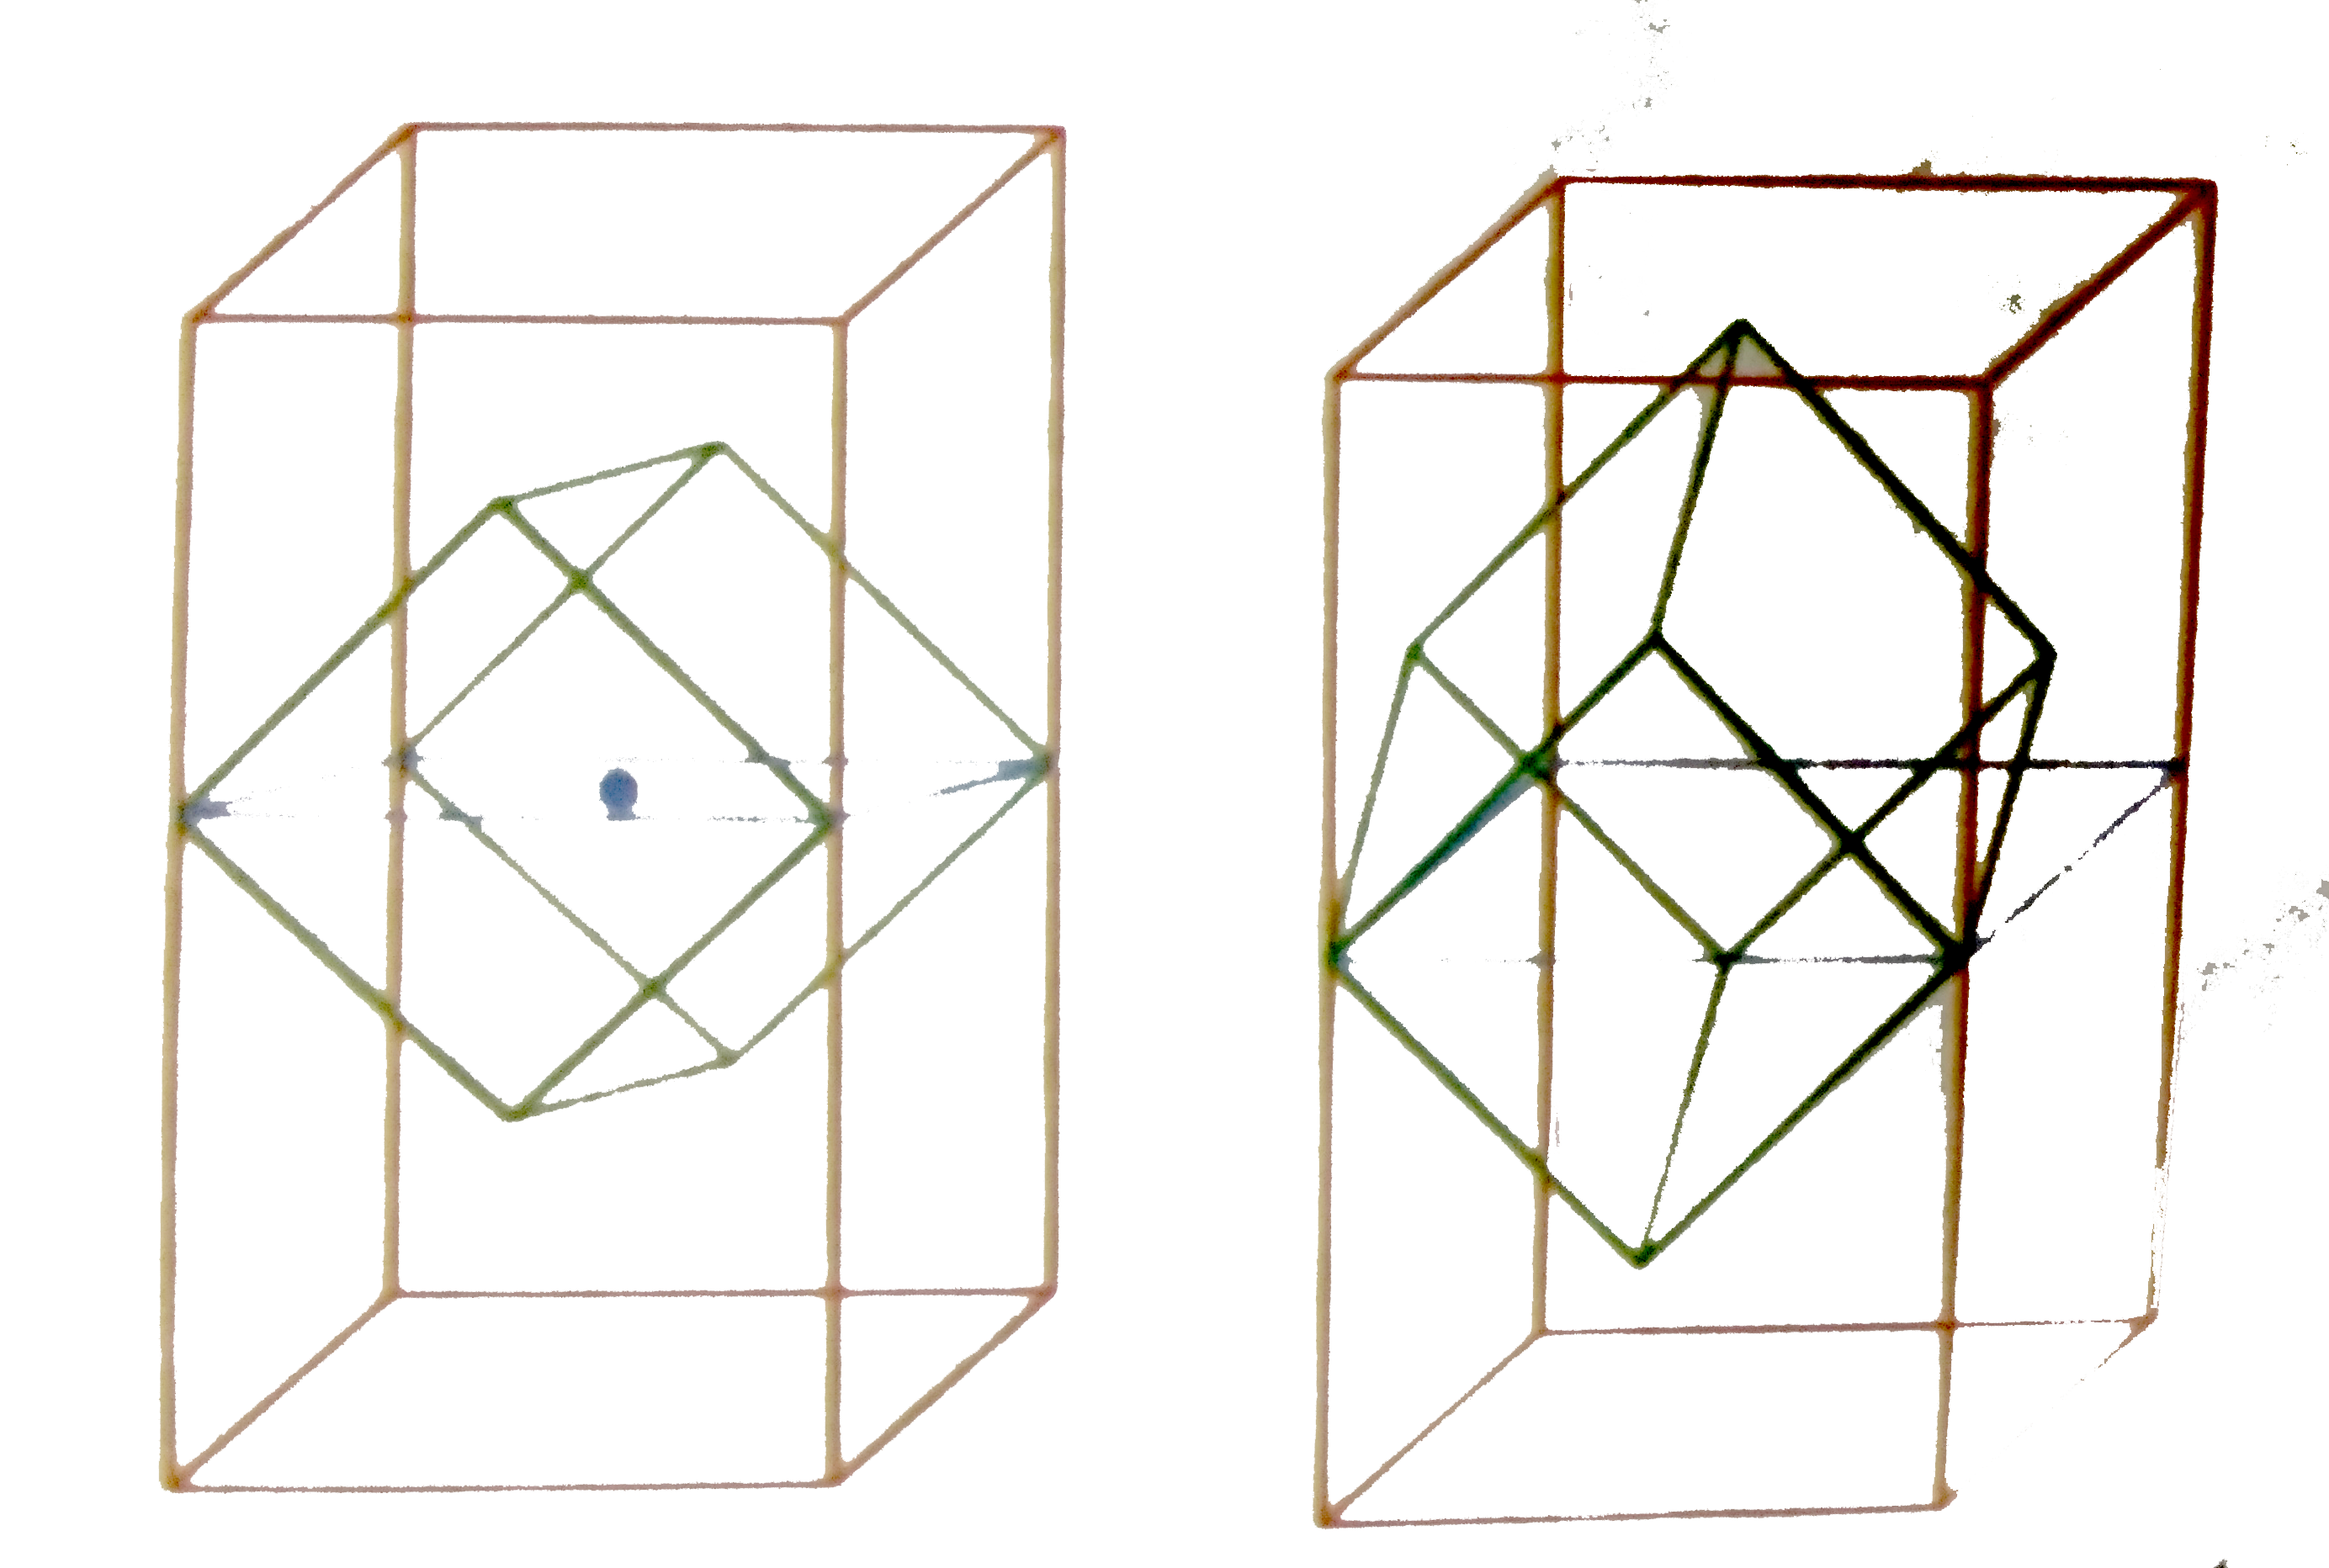 Face centered cubic lattice of NaCl may also smaller, tetragonal unit cell as shown below fig. (a,b)      The volume of the smaller unit cell in fig(b) . If the volume of the normal unit cell V, is